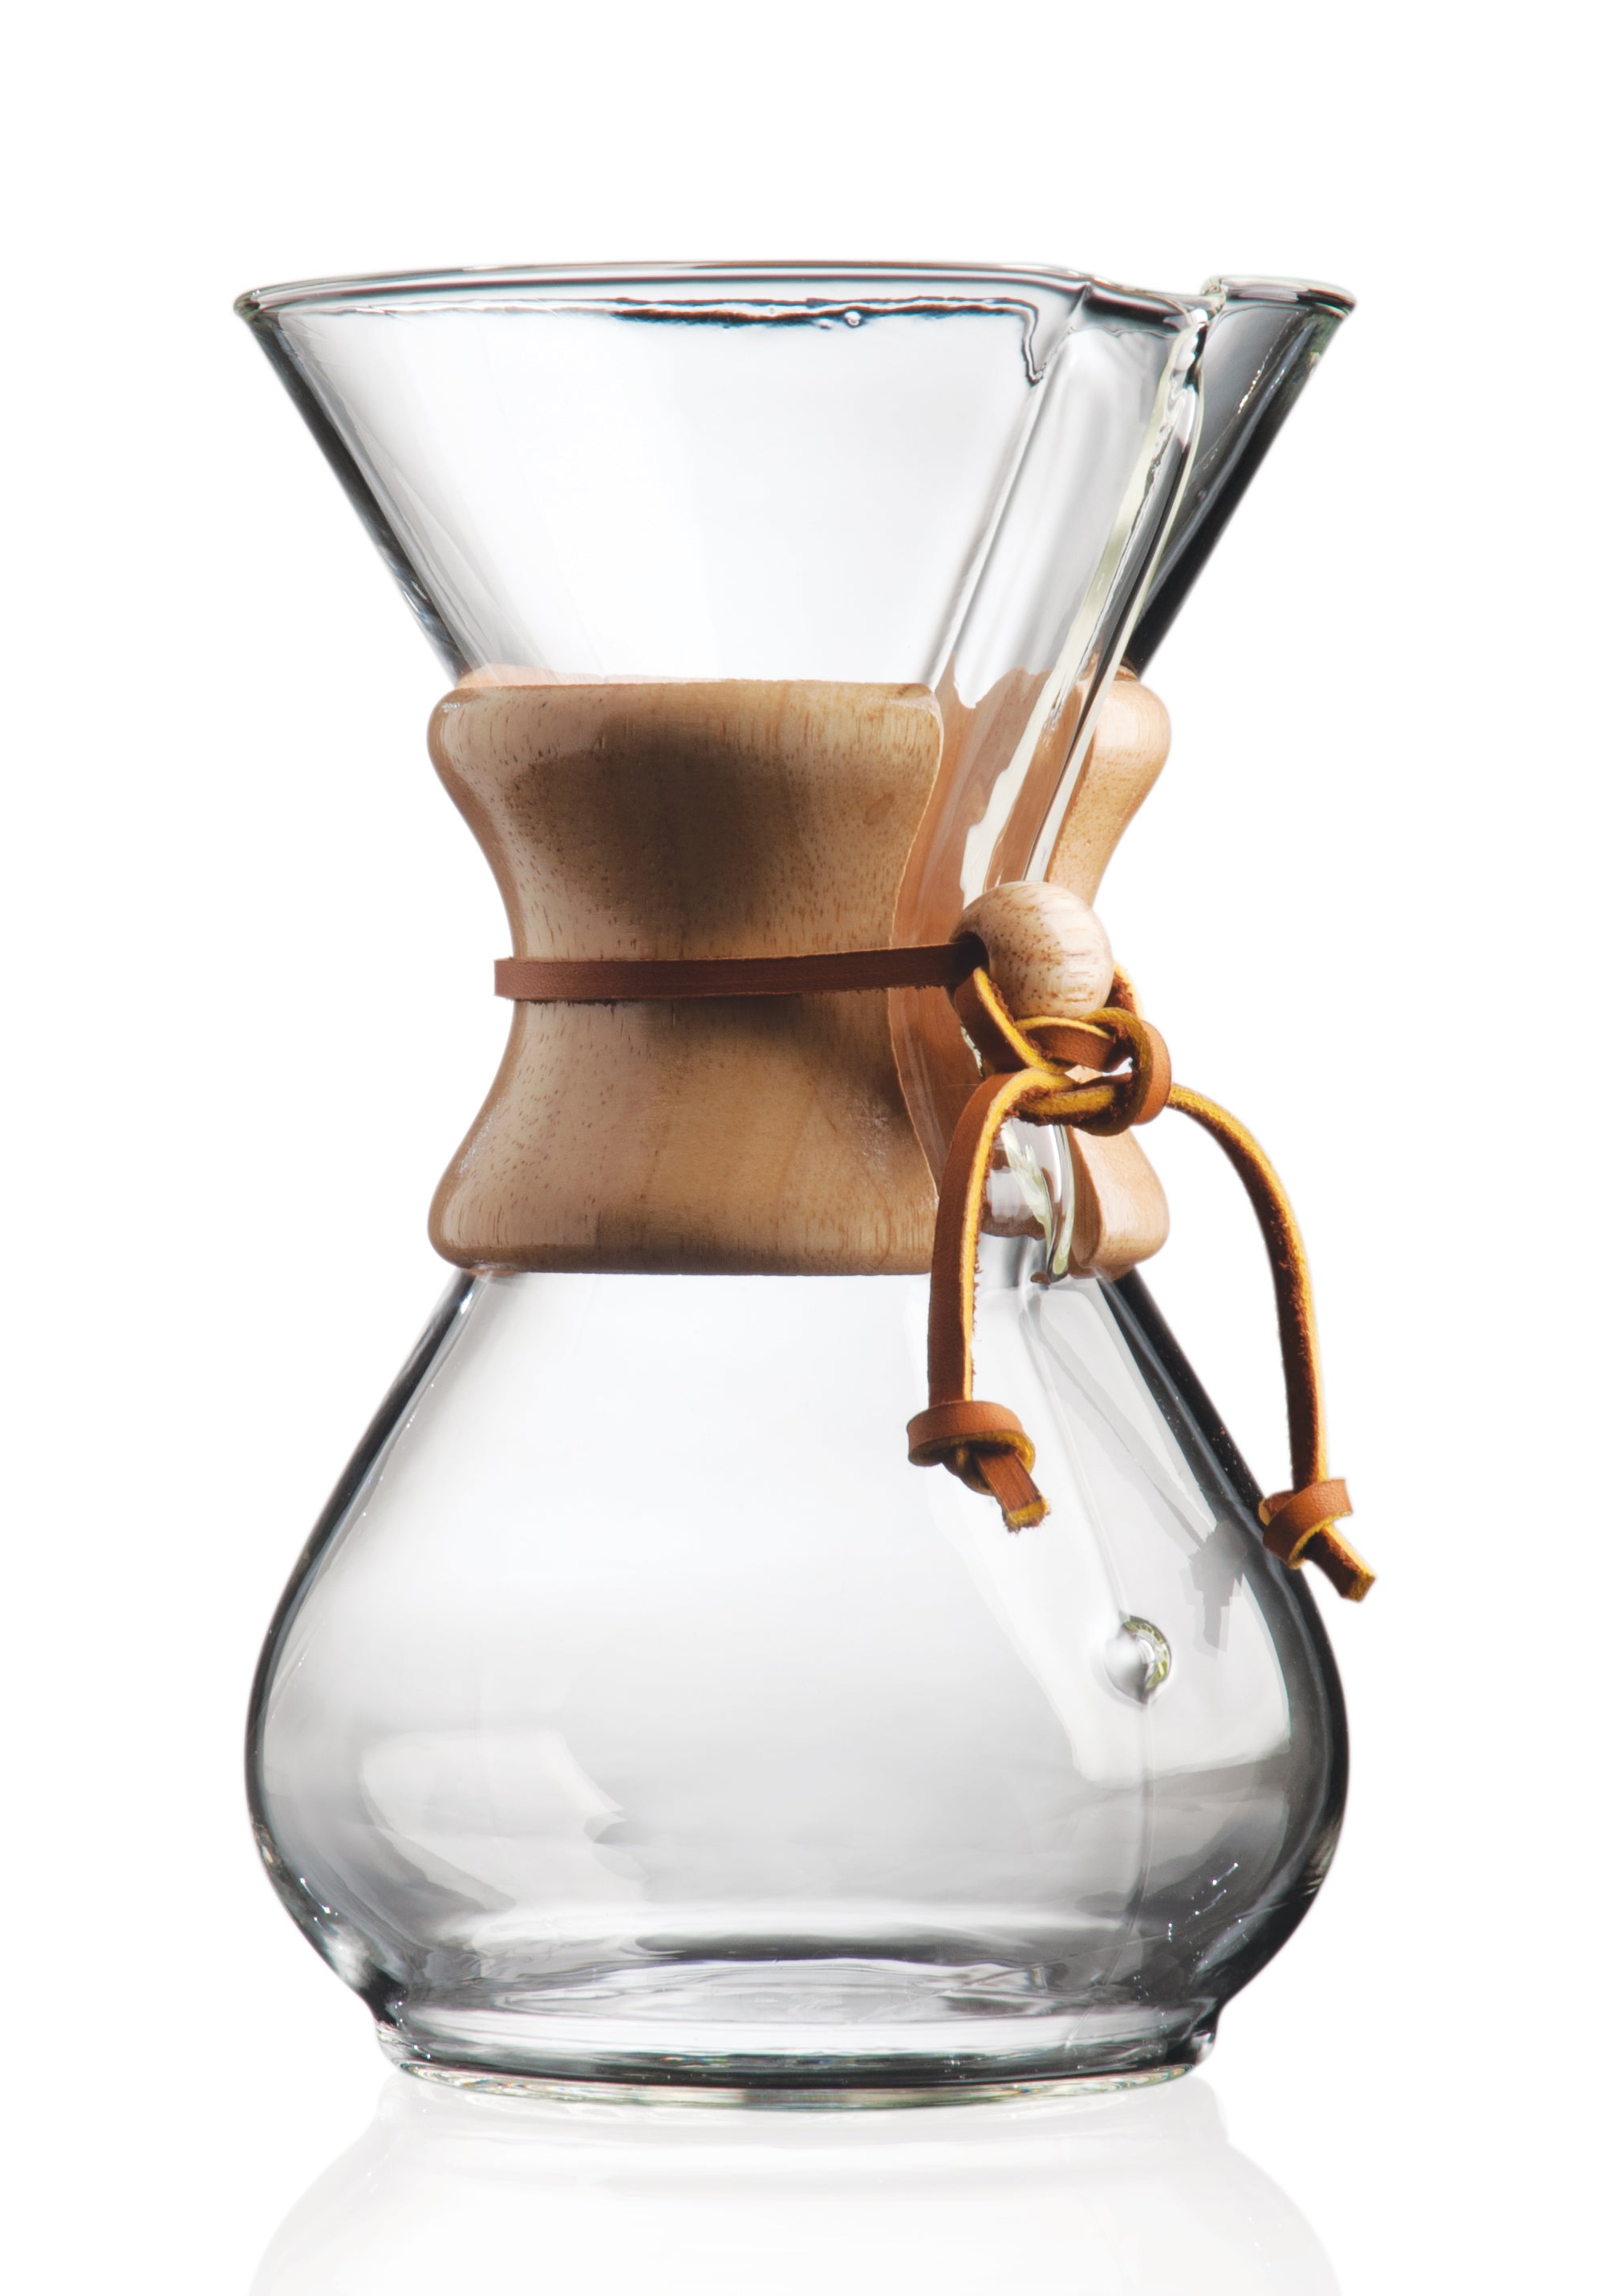 Chemex Ottomatic Coffee Maker 2.0 Includes Gift Receipt For